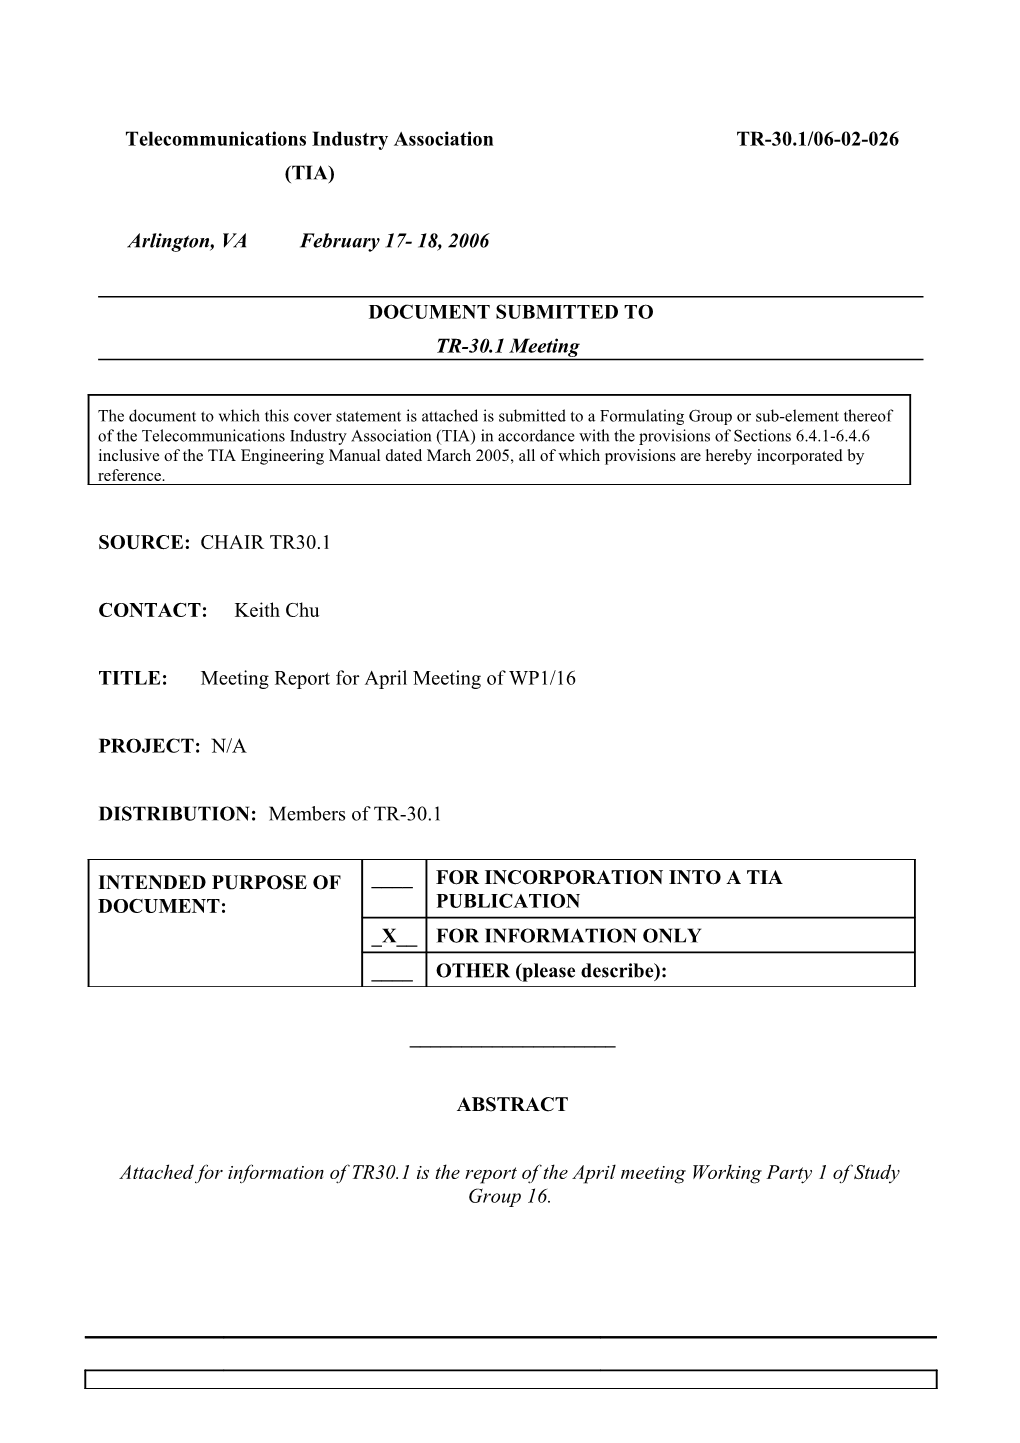 TEMPORARY DOCUMENT: Report of Working Party 1/16 (Modem, Fax, and Equipment Transmission)